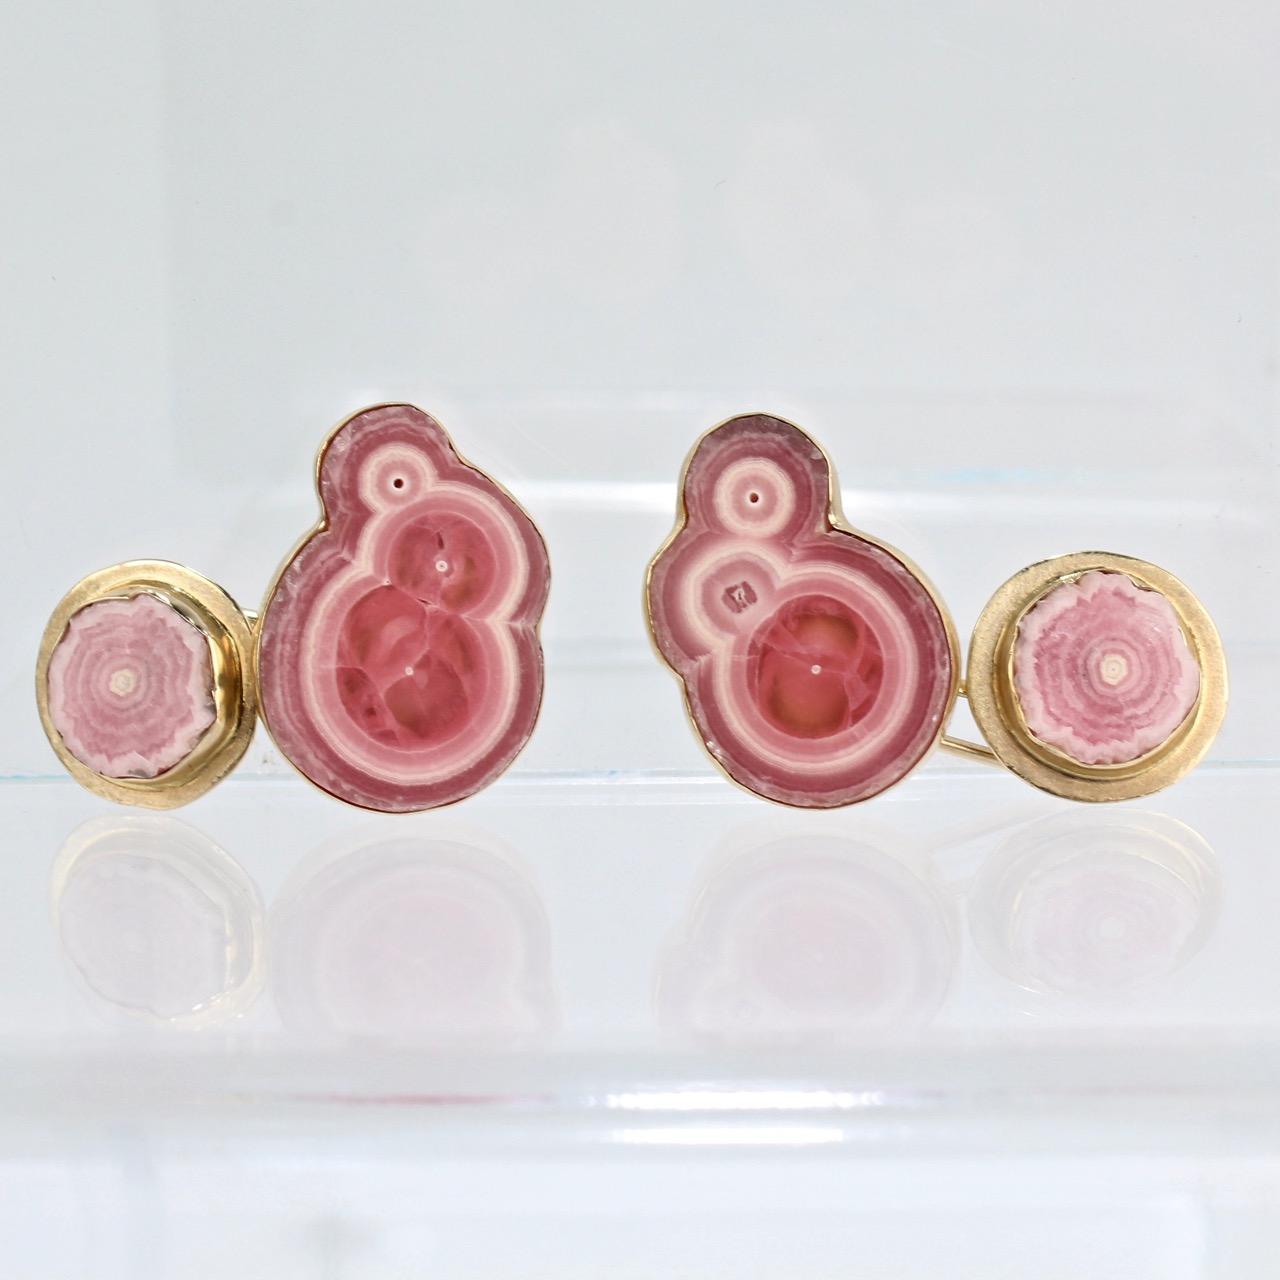 A fine pair of bezel-set 'Rhodochrosite and Gold cufflinks by Isabelle Posillico.

The pink stones in these cufflinks present like banded cross-cuts of fossilized wood with wonderful variation between pinks and whites and are set in 14k and 18K